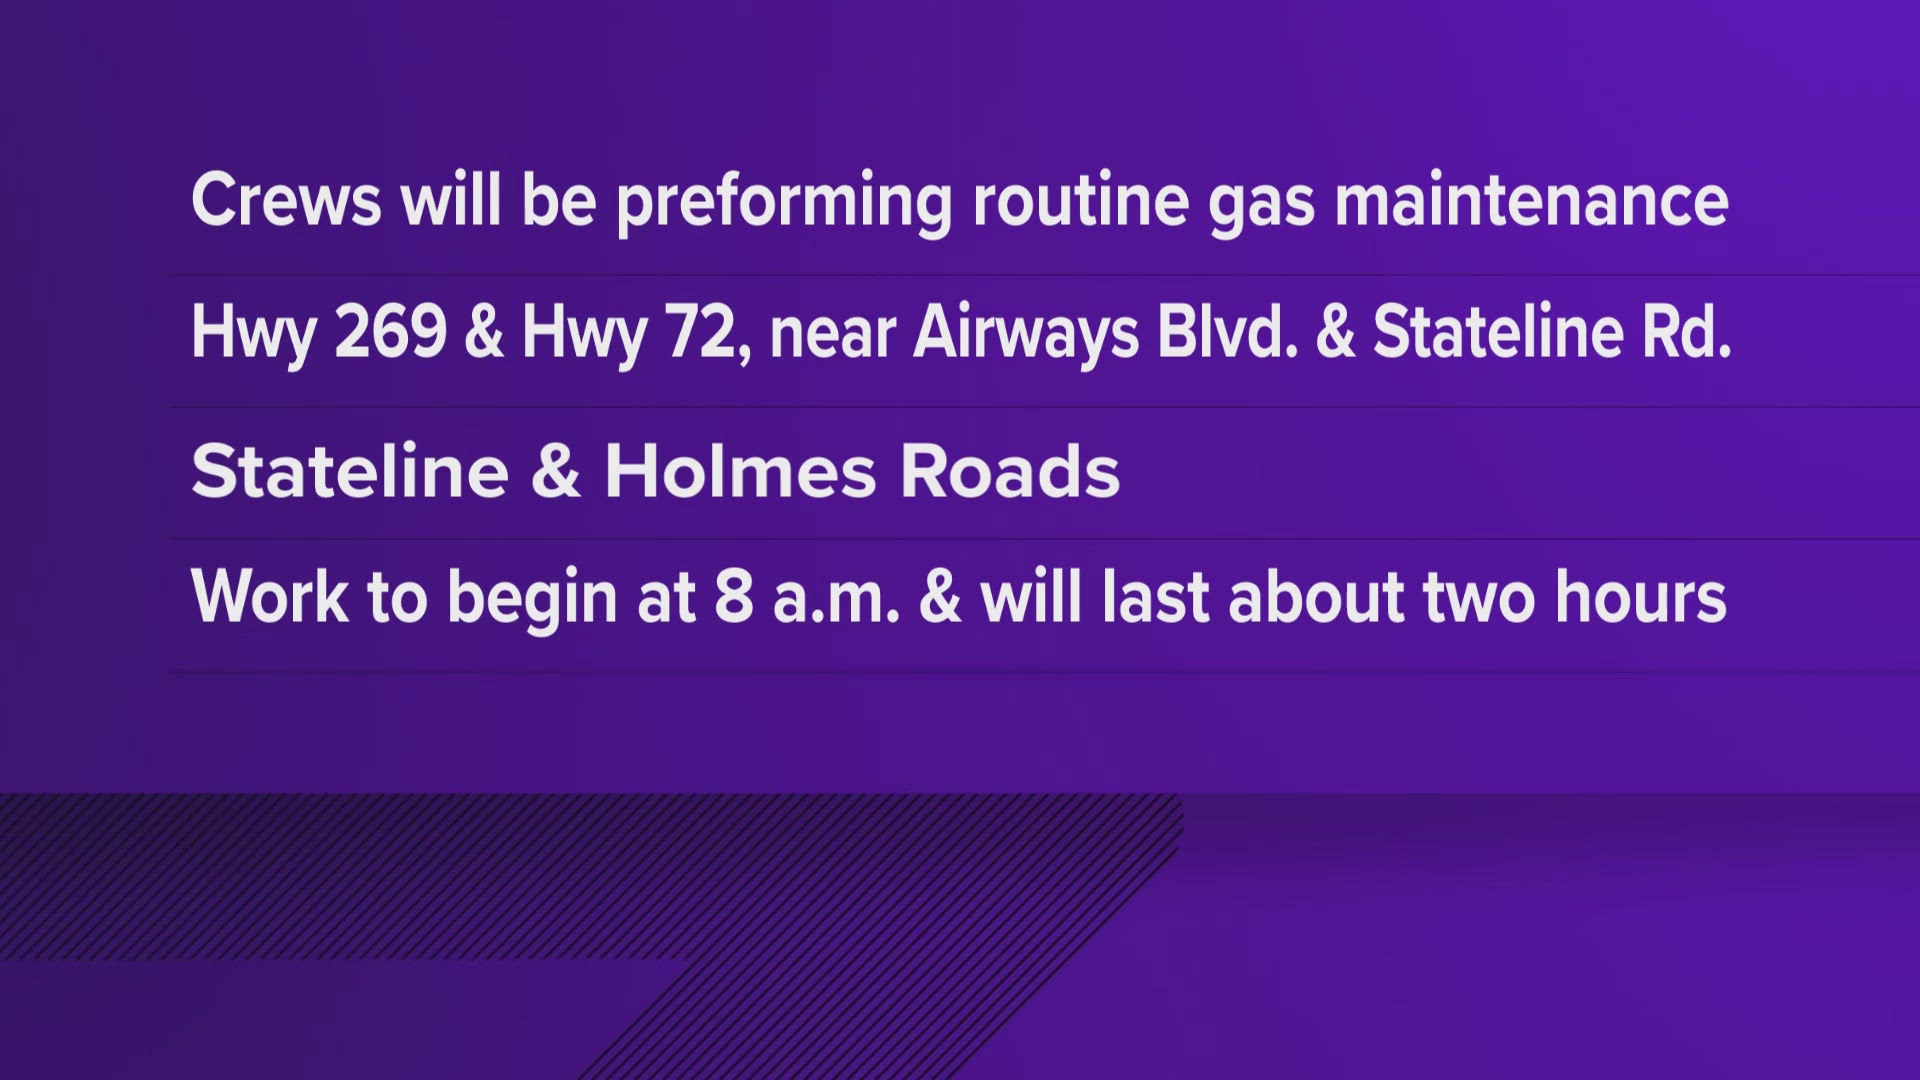 Crews will be performing routine gas maintenance